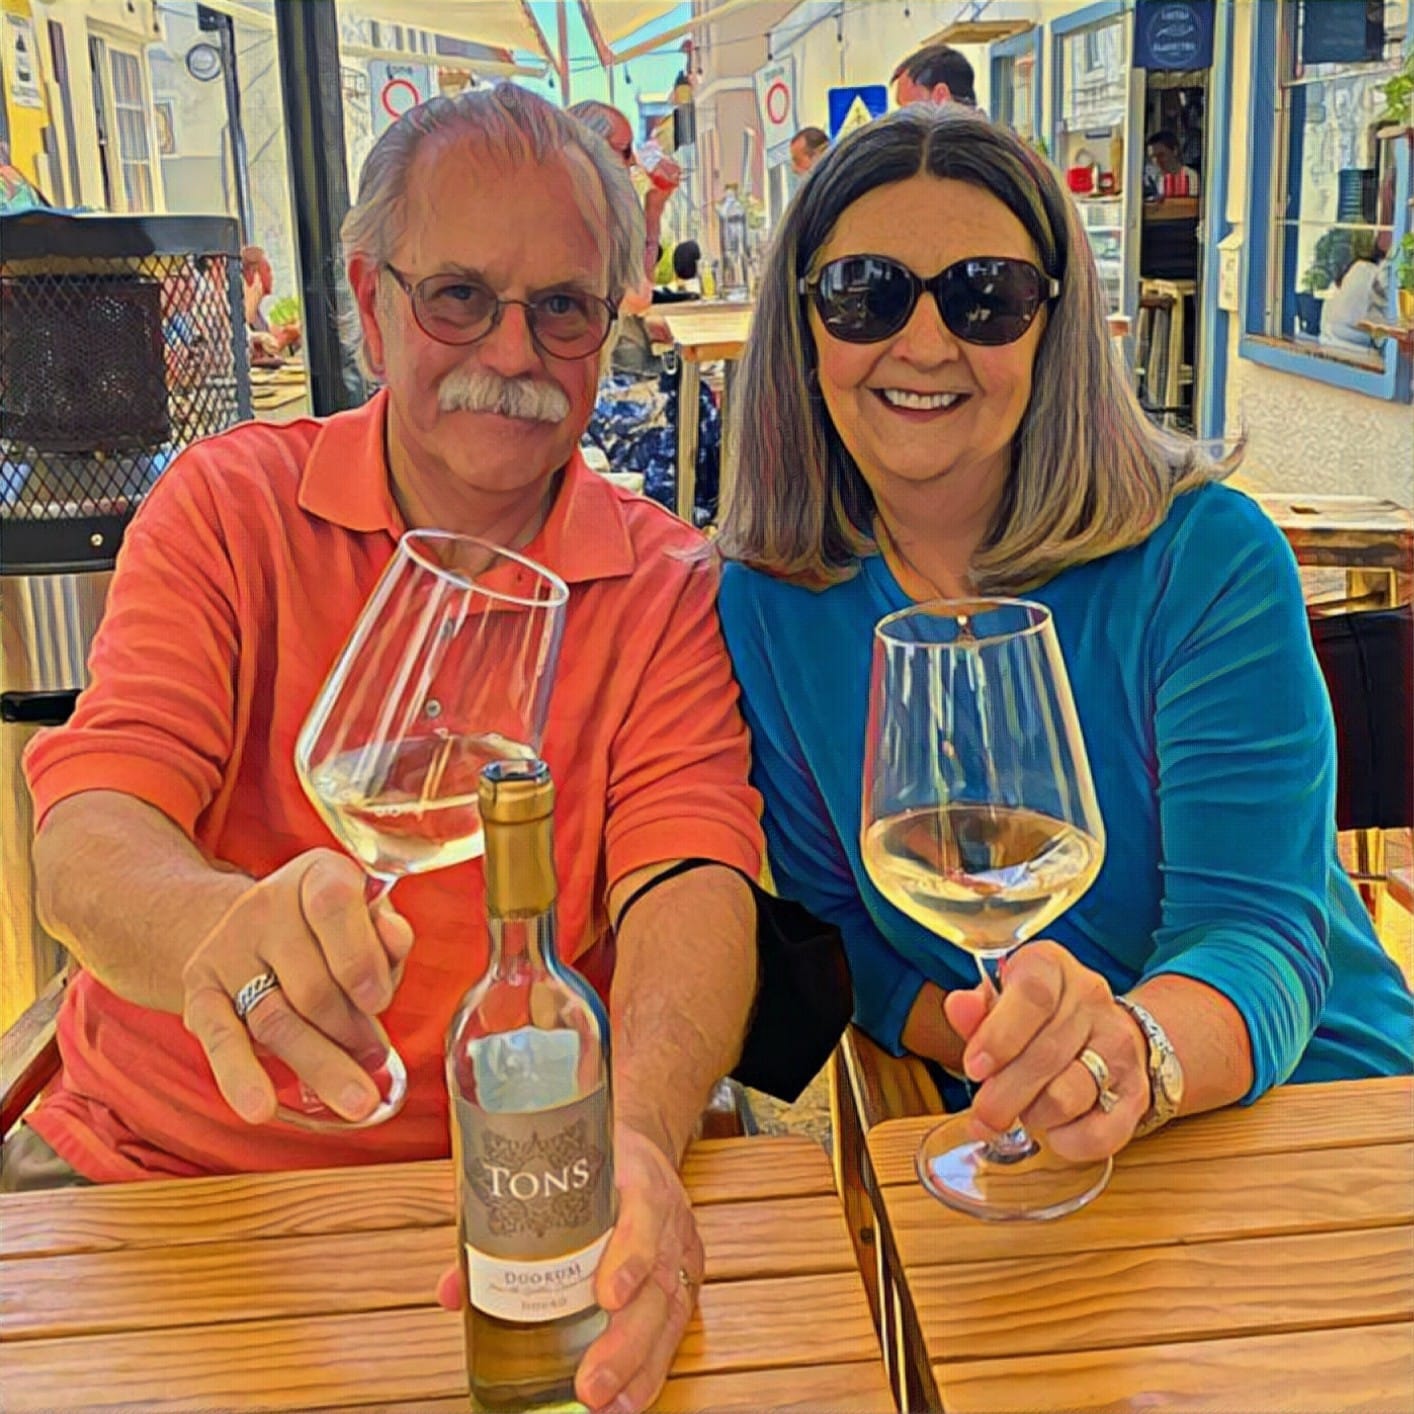 Man and woman with wine glasses